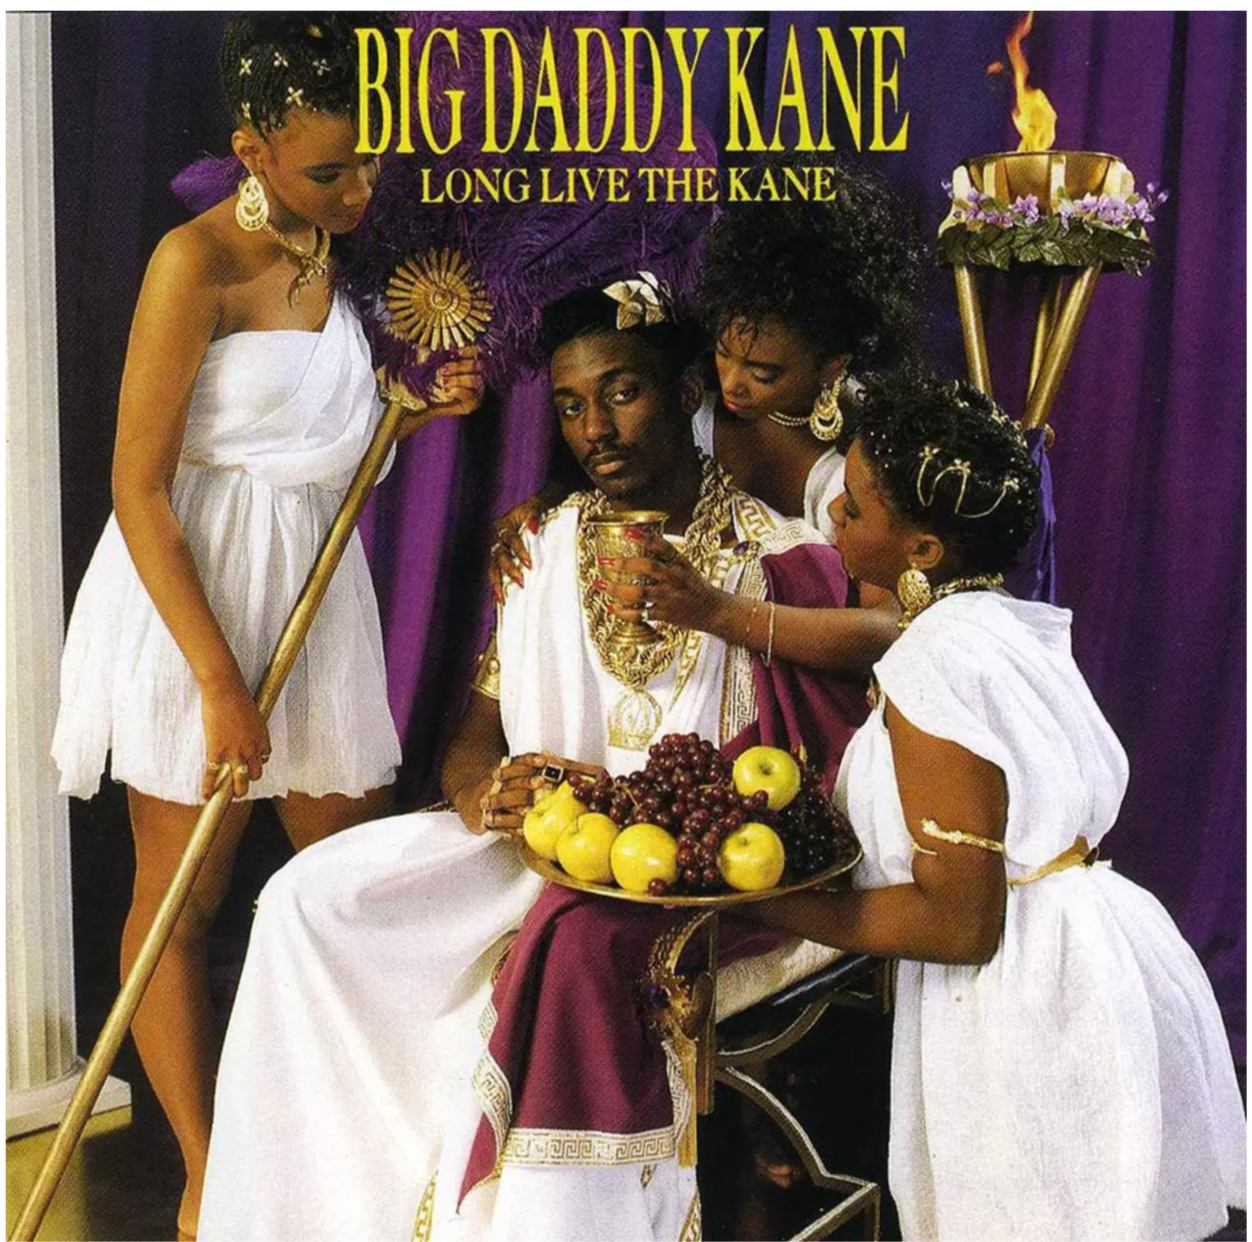 Cover art for the album “Long Live the Kane” by the artist Big Daddy Kane, 1988.